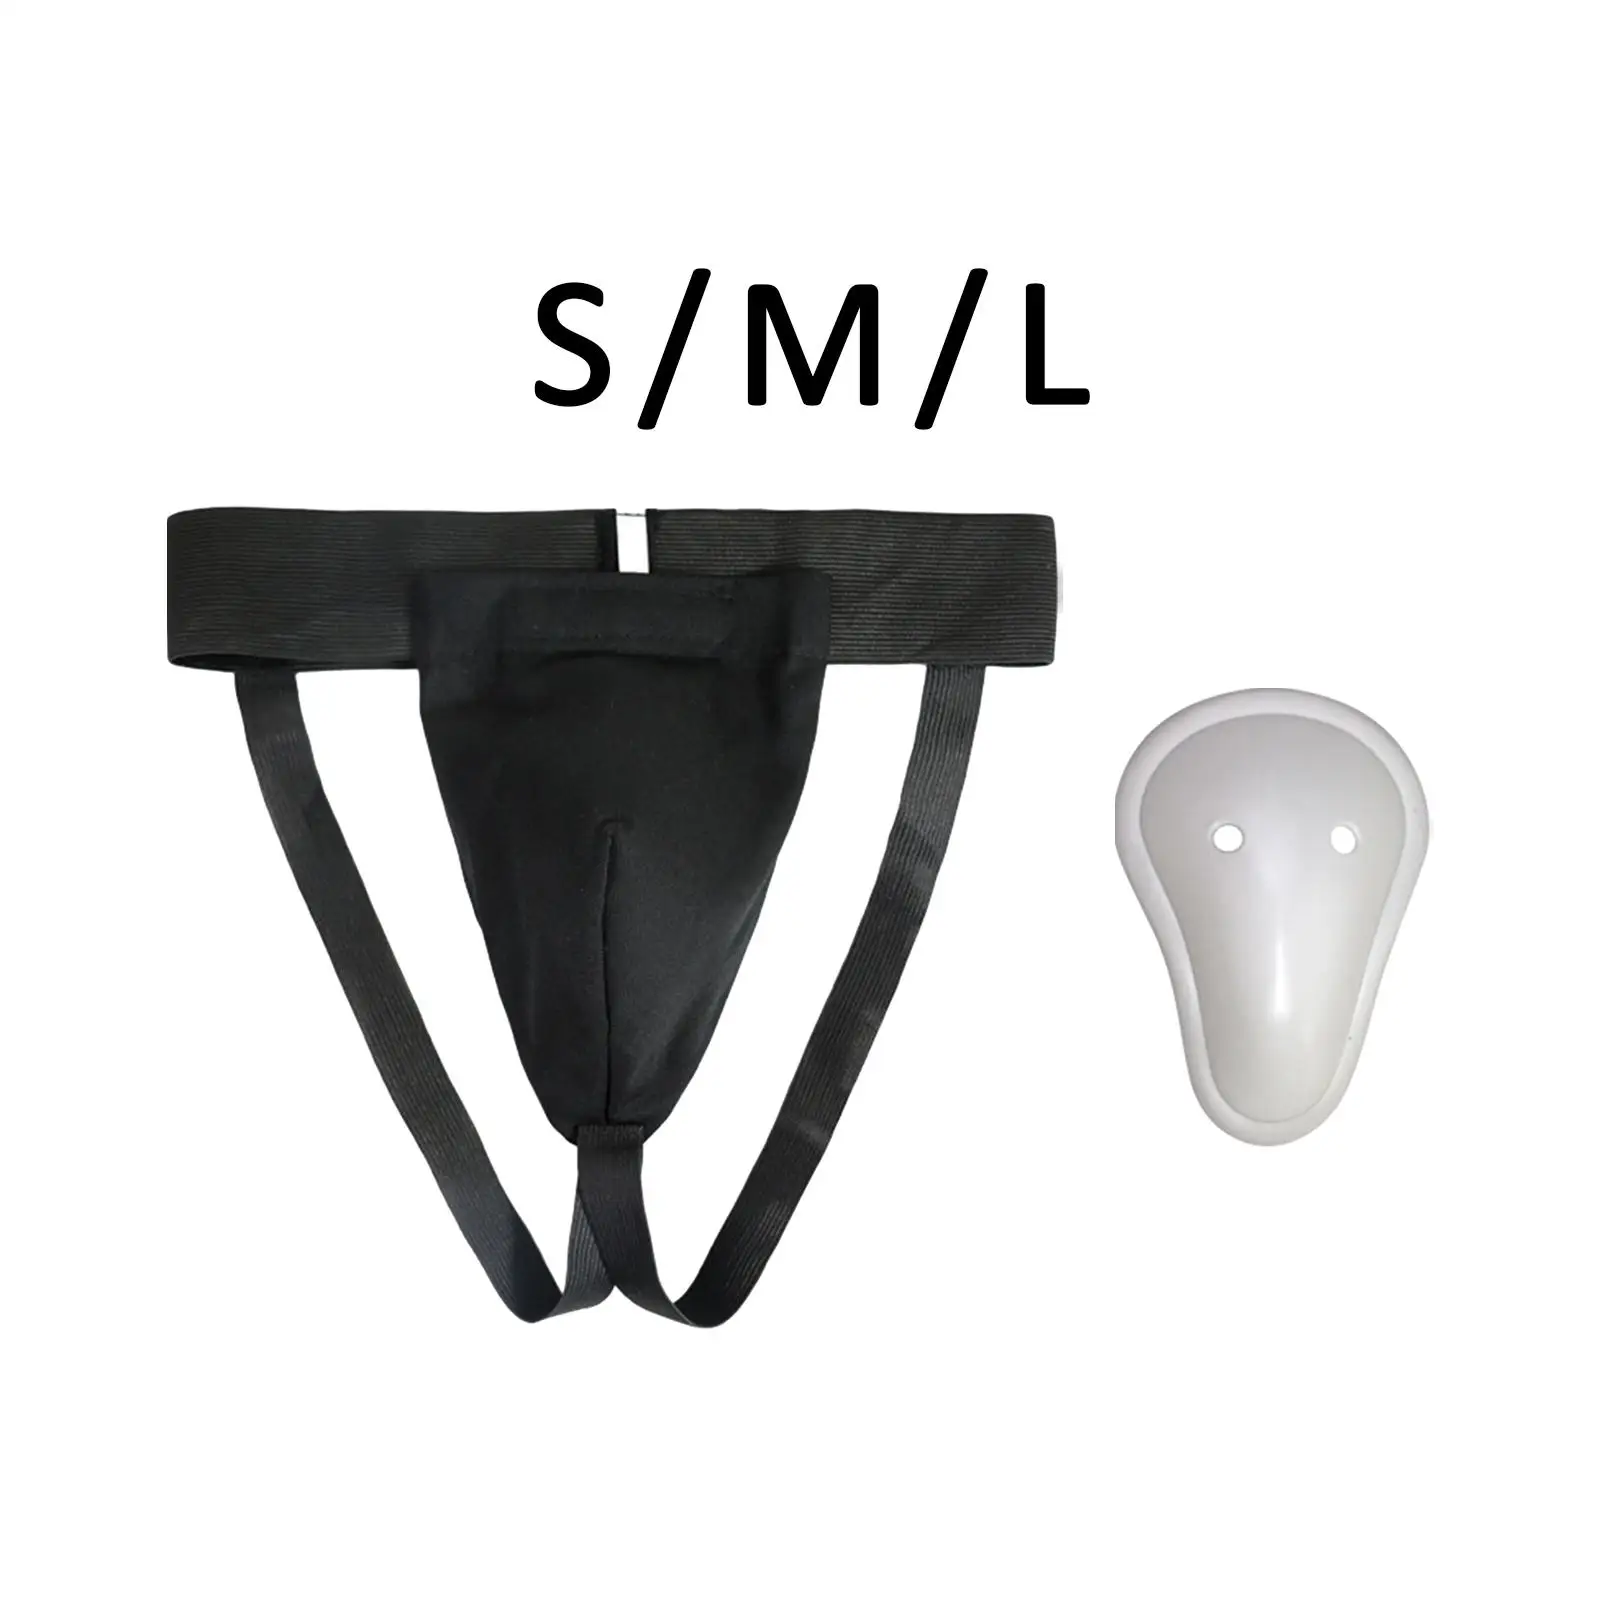 Taekwondo Groin Protector Professional Training Safety Cup Pocket Crotch Protector for Sanda Workout Karate Sparring Kick Boxing